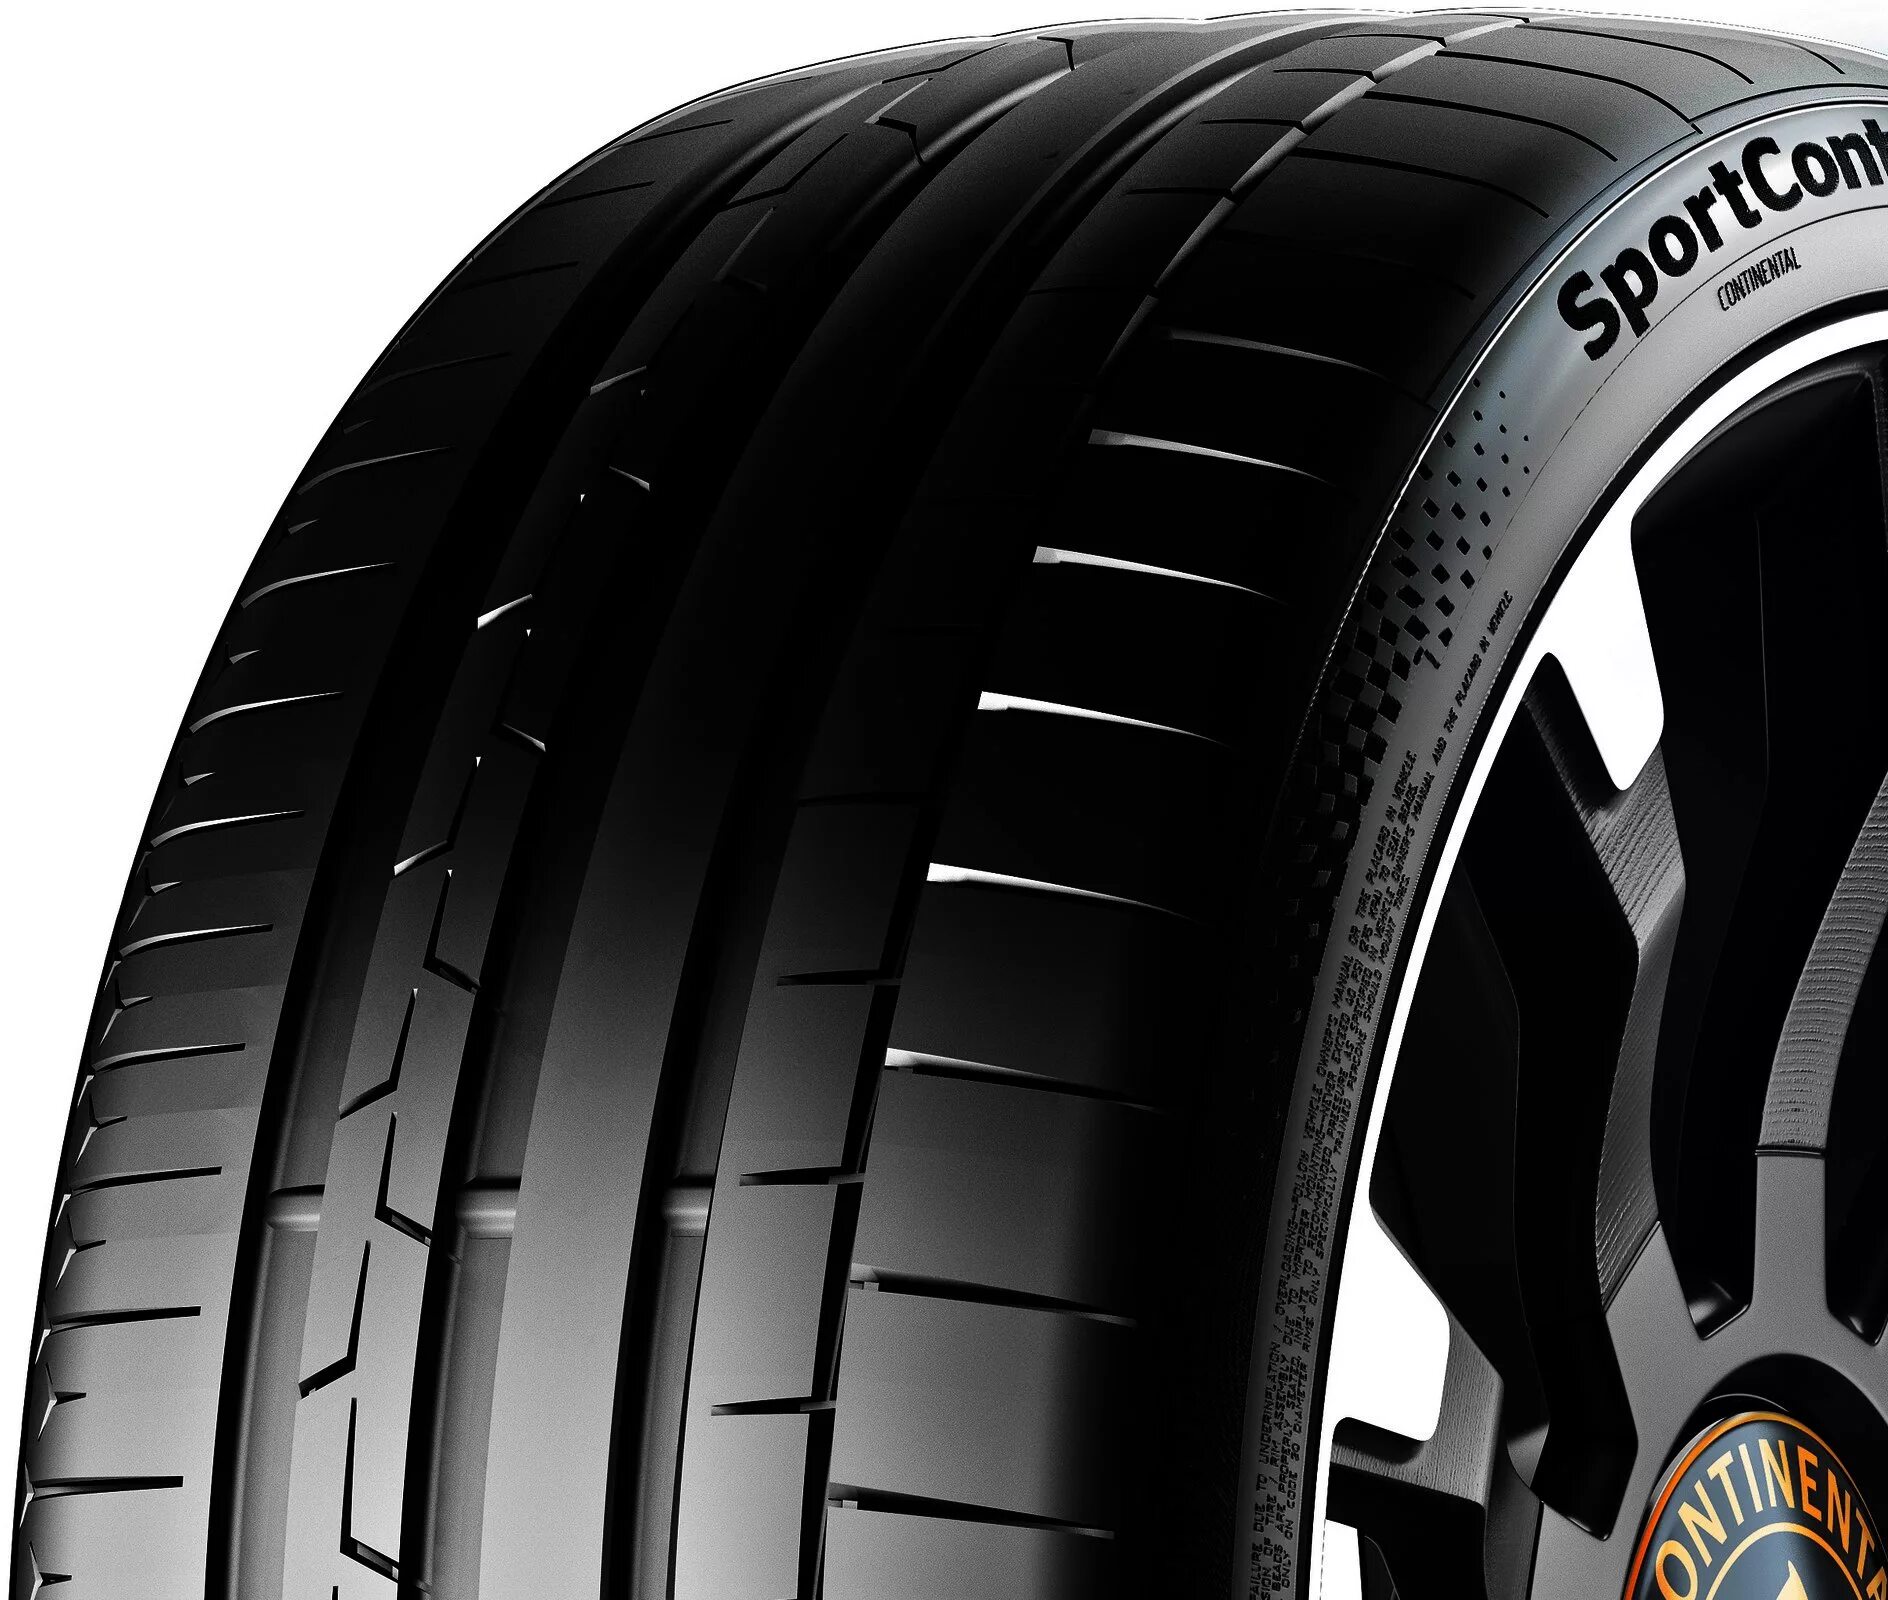 Continental CONTISPORTCONTACT 6. Continental SPORTCONTACT 6. Continental CONTIPREMIUMCONTACT 6 325/40 r22. Continental SPORTCONTACT 6 225 40 255 35. Michelin pilot sport 225 45 r17